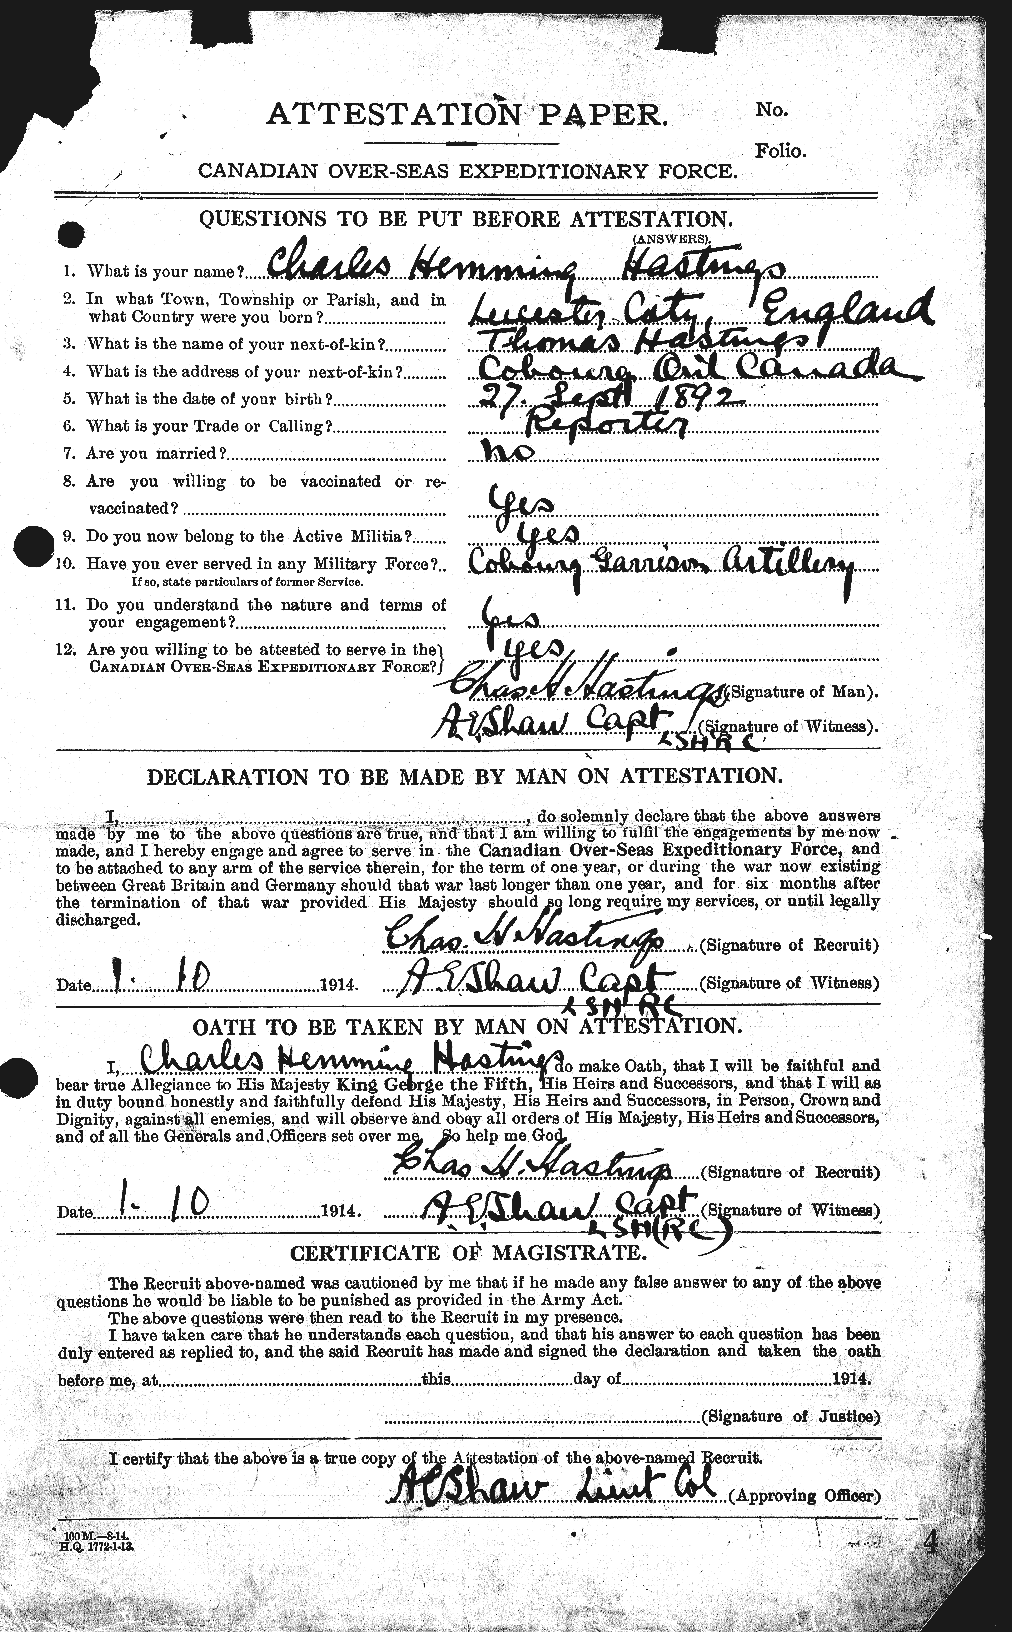 Personnel Records of the First World War - CEF 387054a